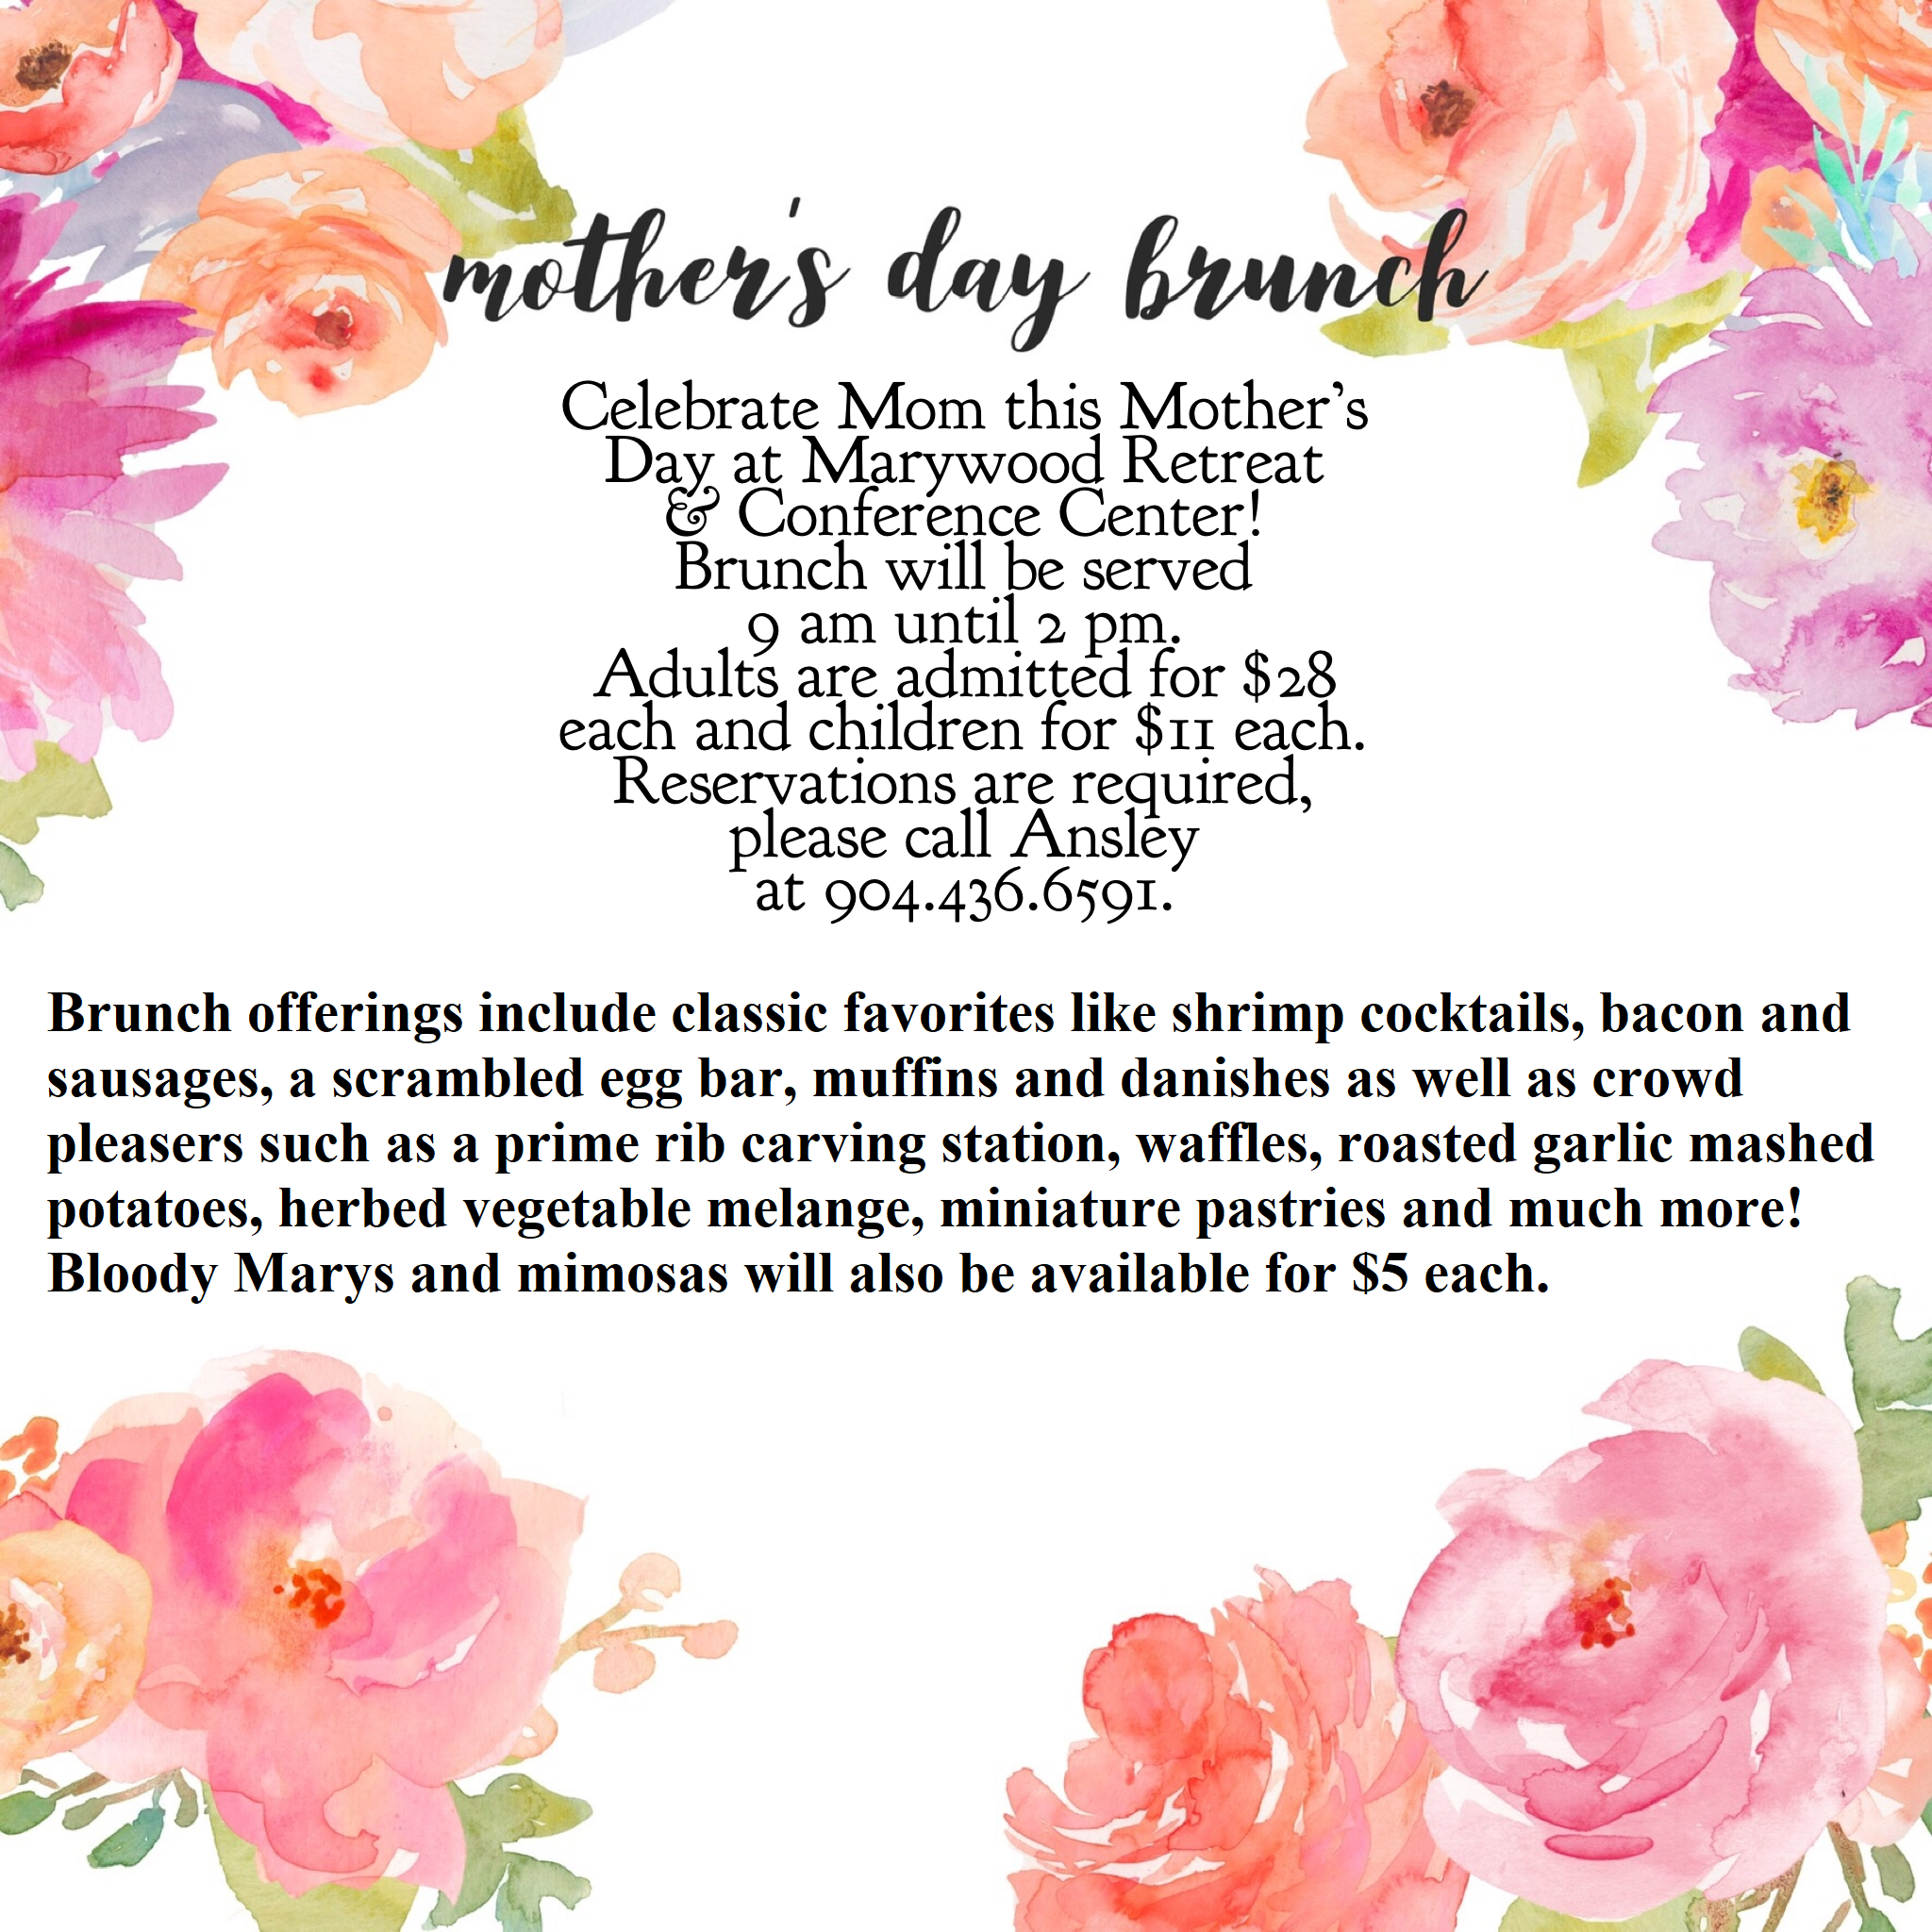 Mother's Day Brunch - Marywood